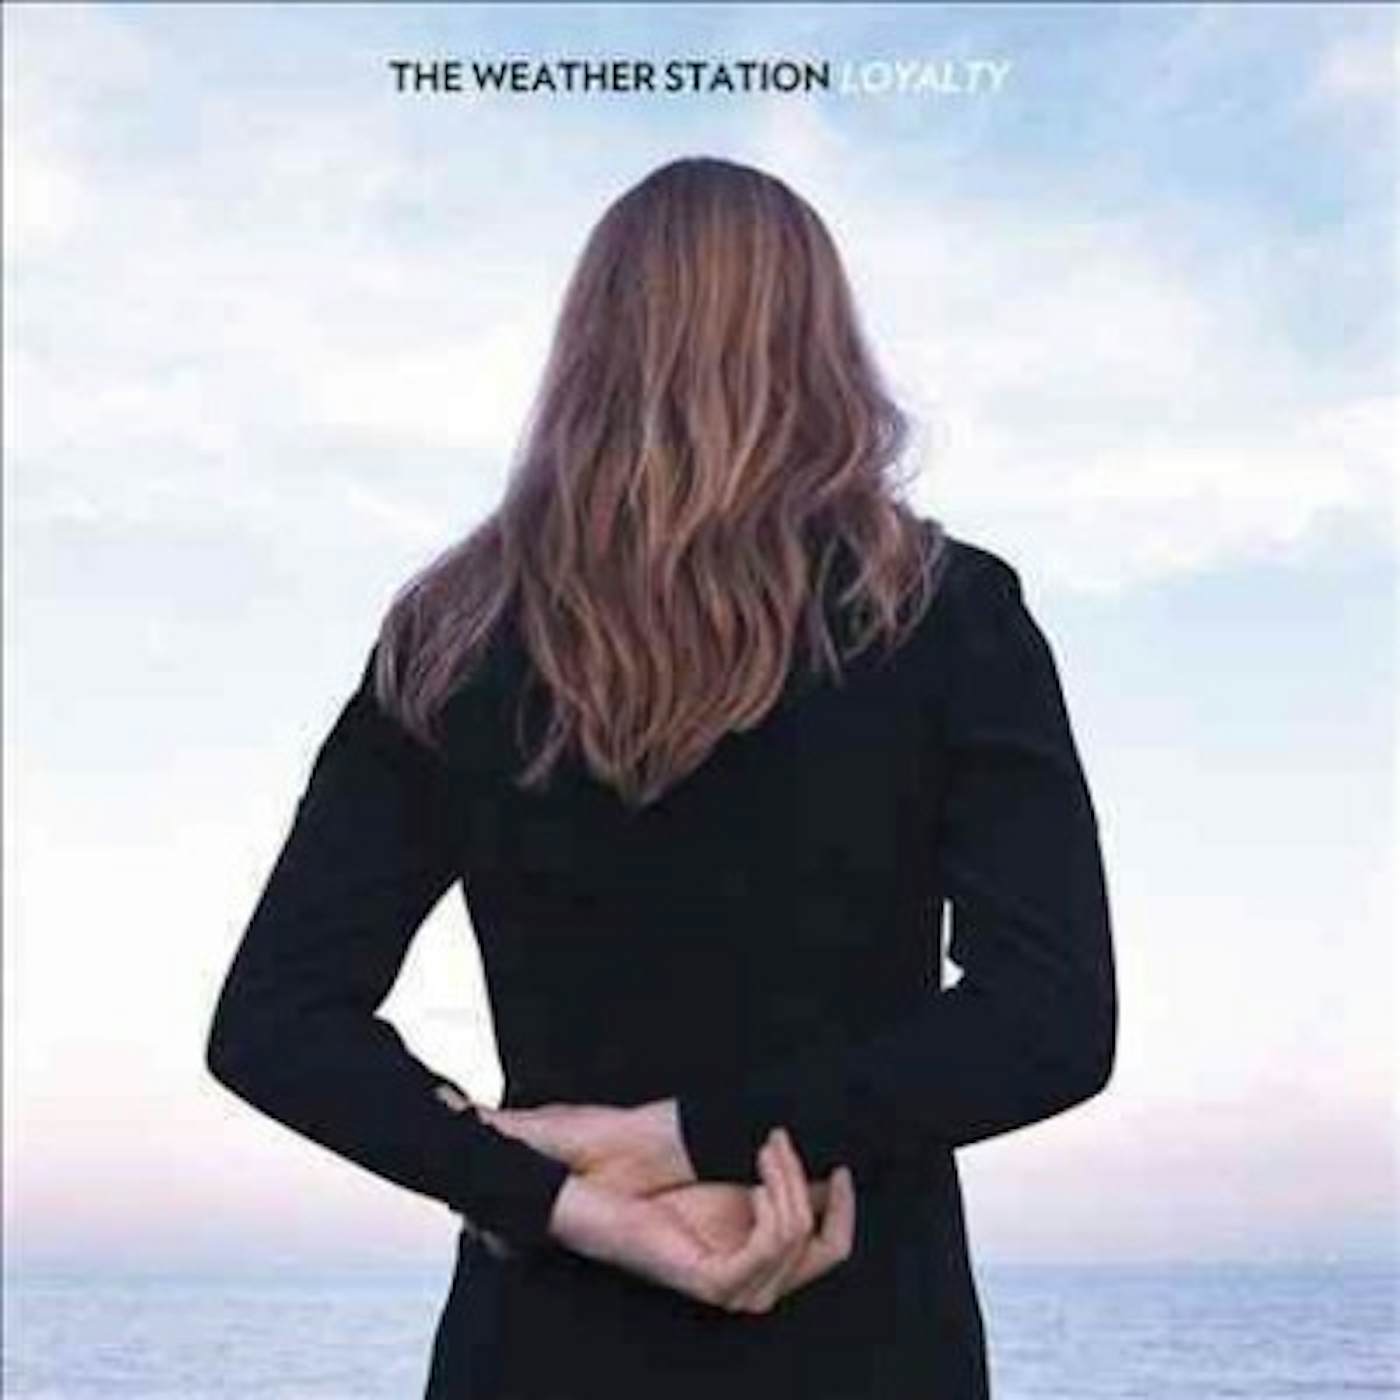 The Weather Station Loyalty CD